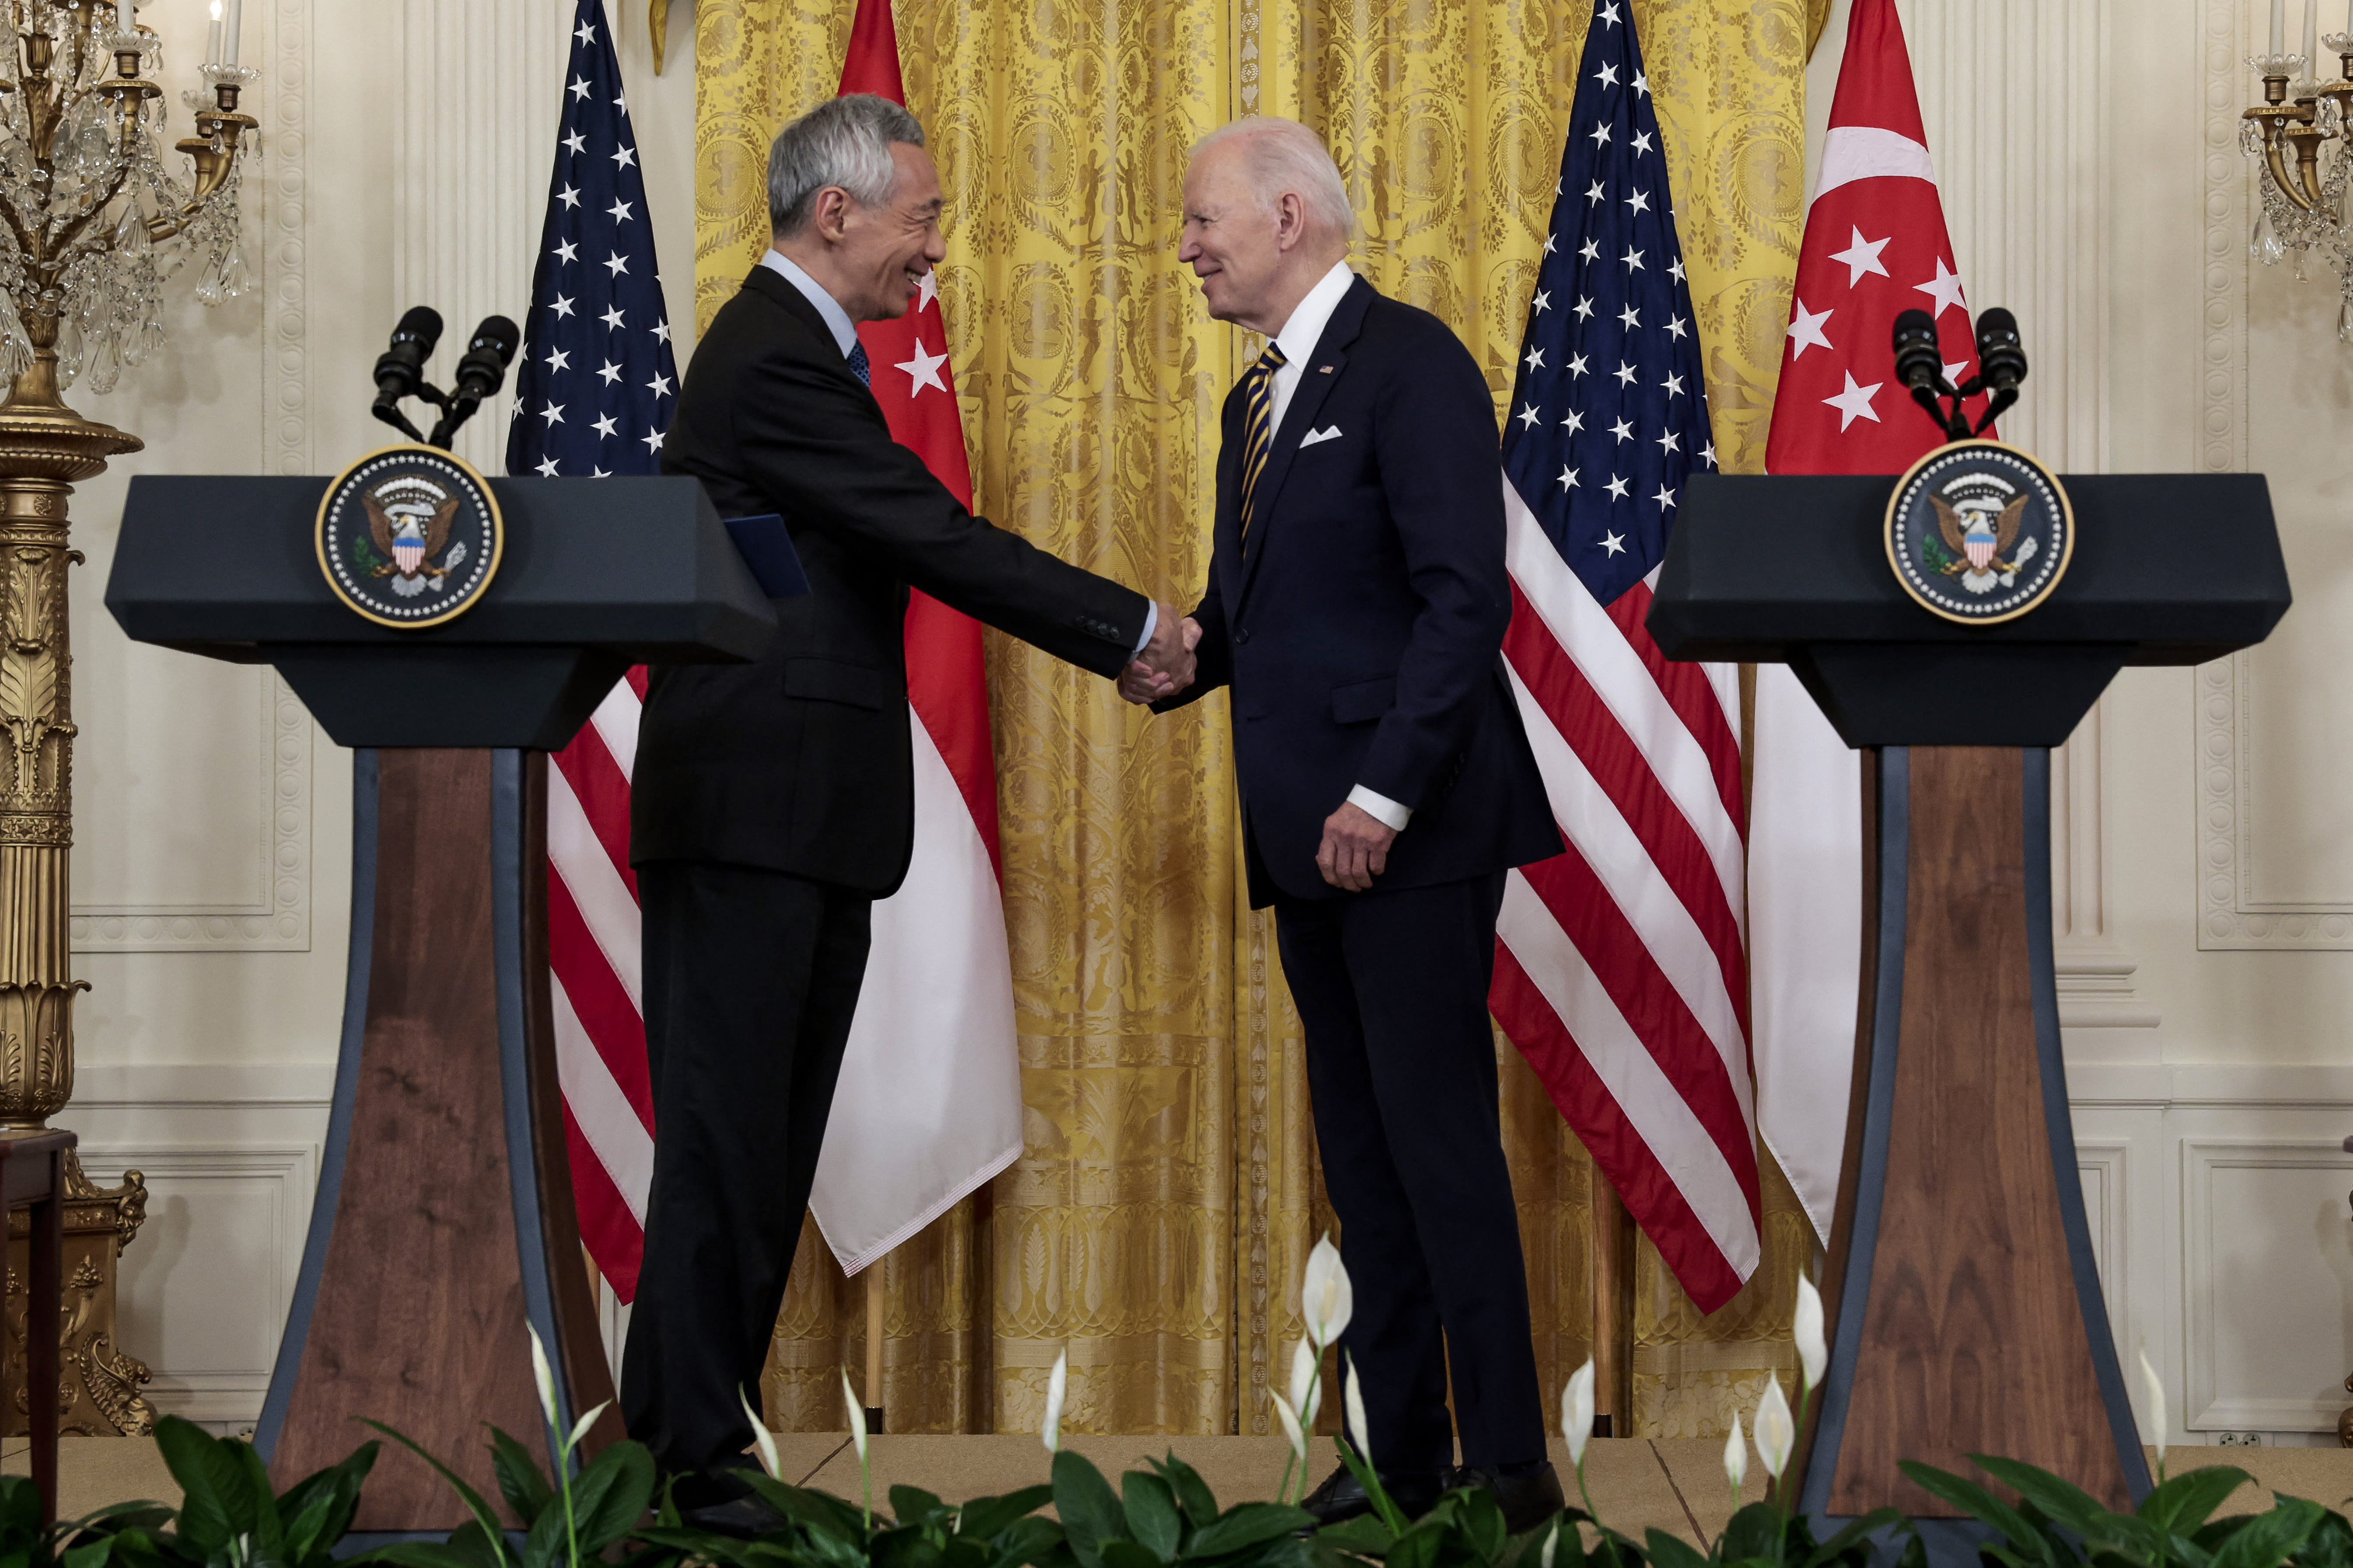 PM Lee calls on US to pursue 'positive economic agenda' in the region, welcomes proposed US-led economic framework